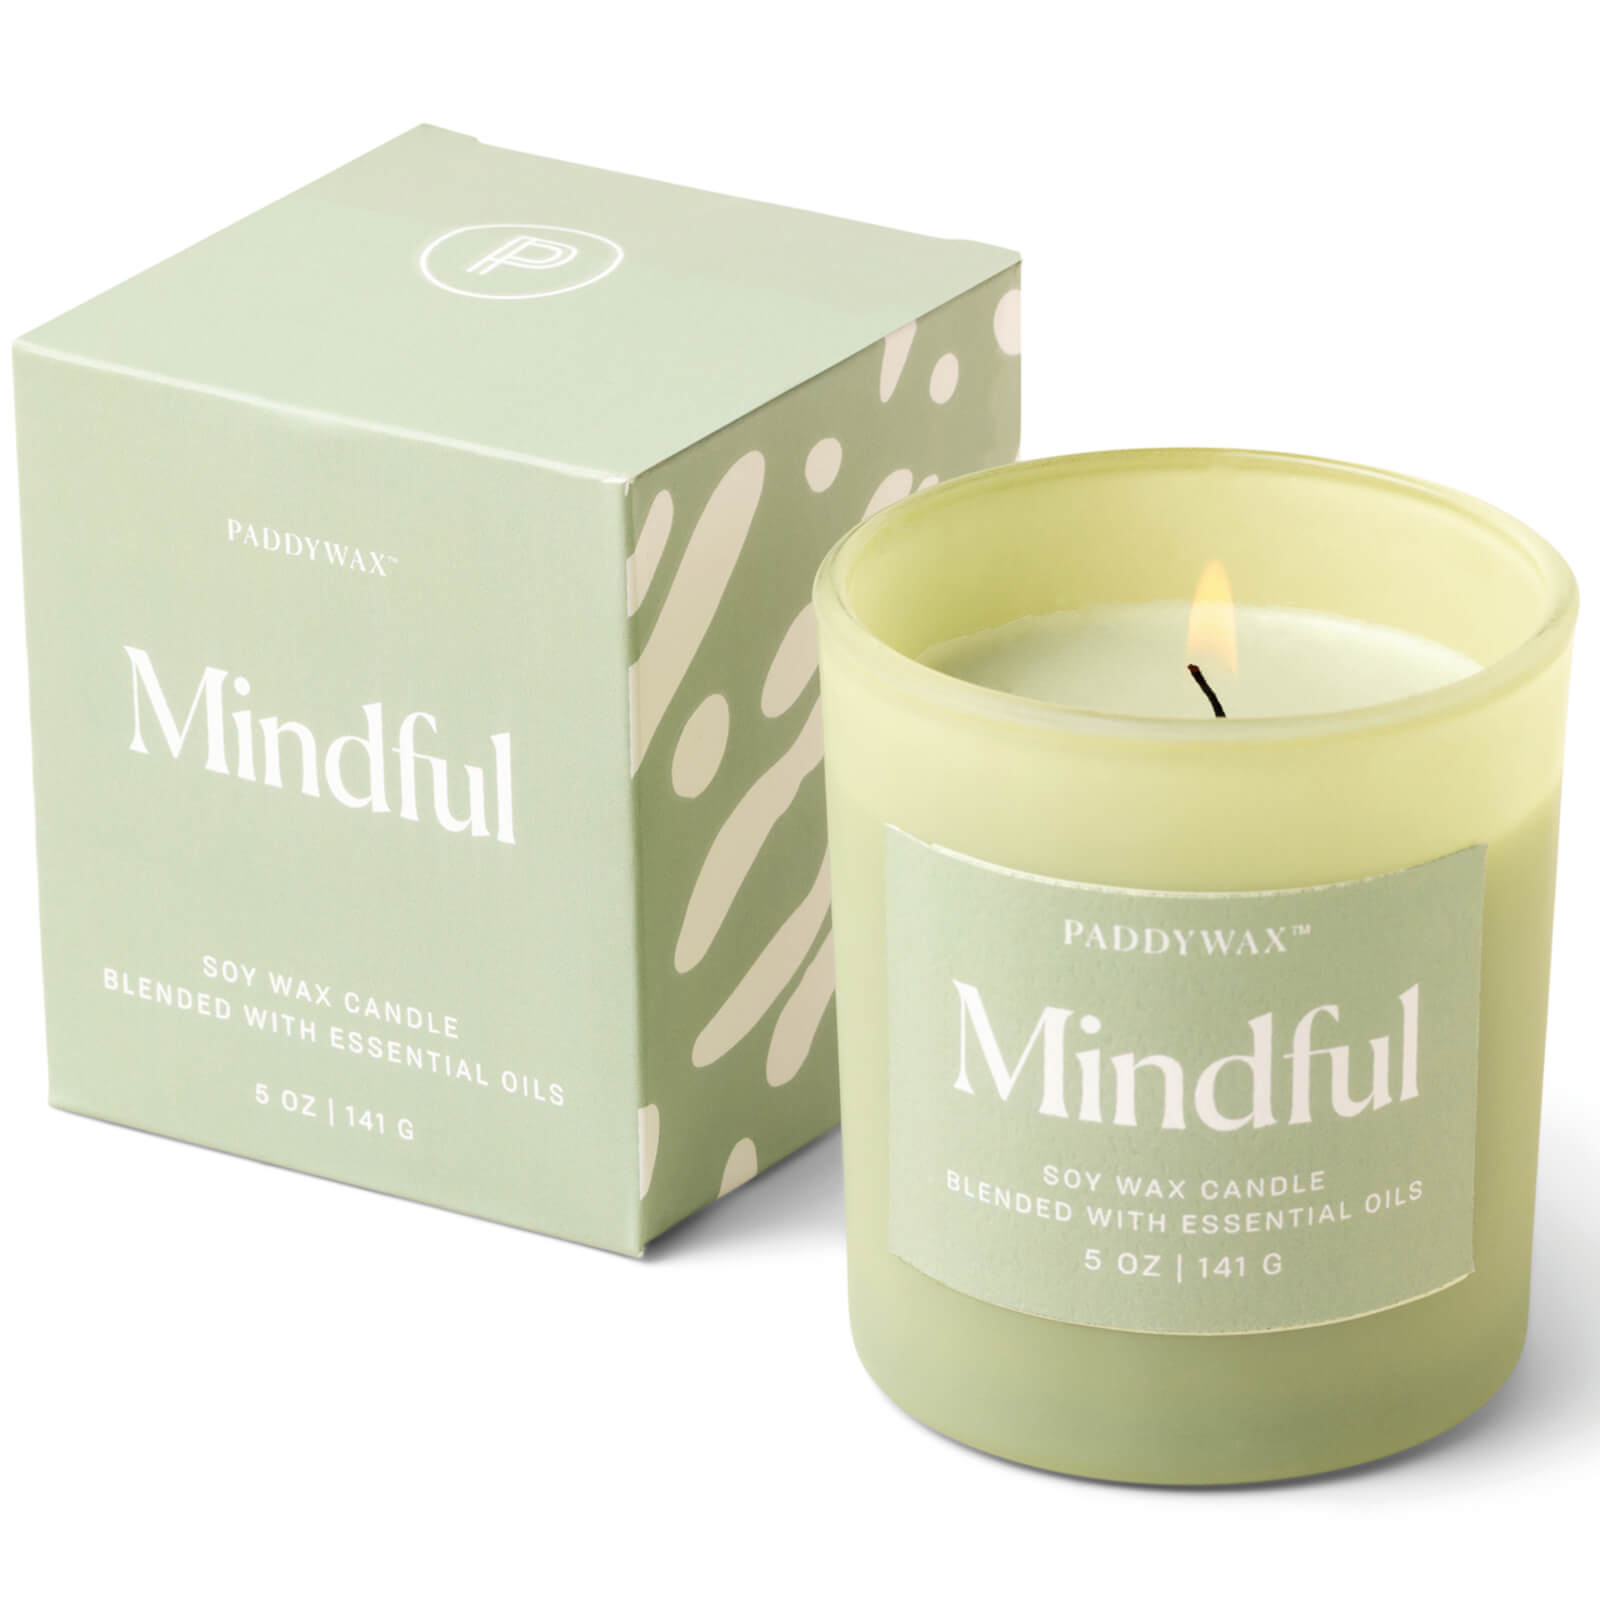 Image of Paddywax Mindful Candle